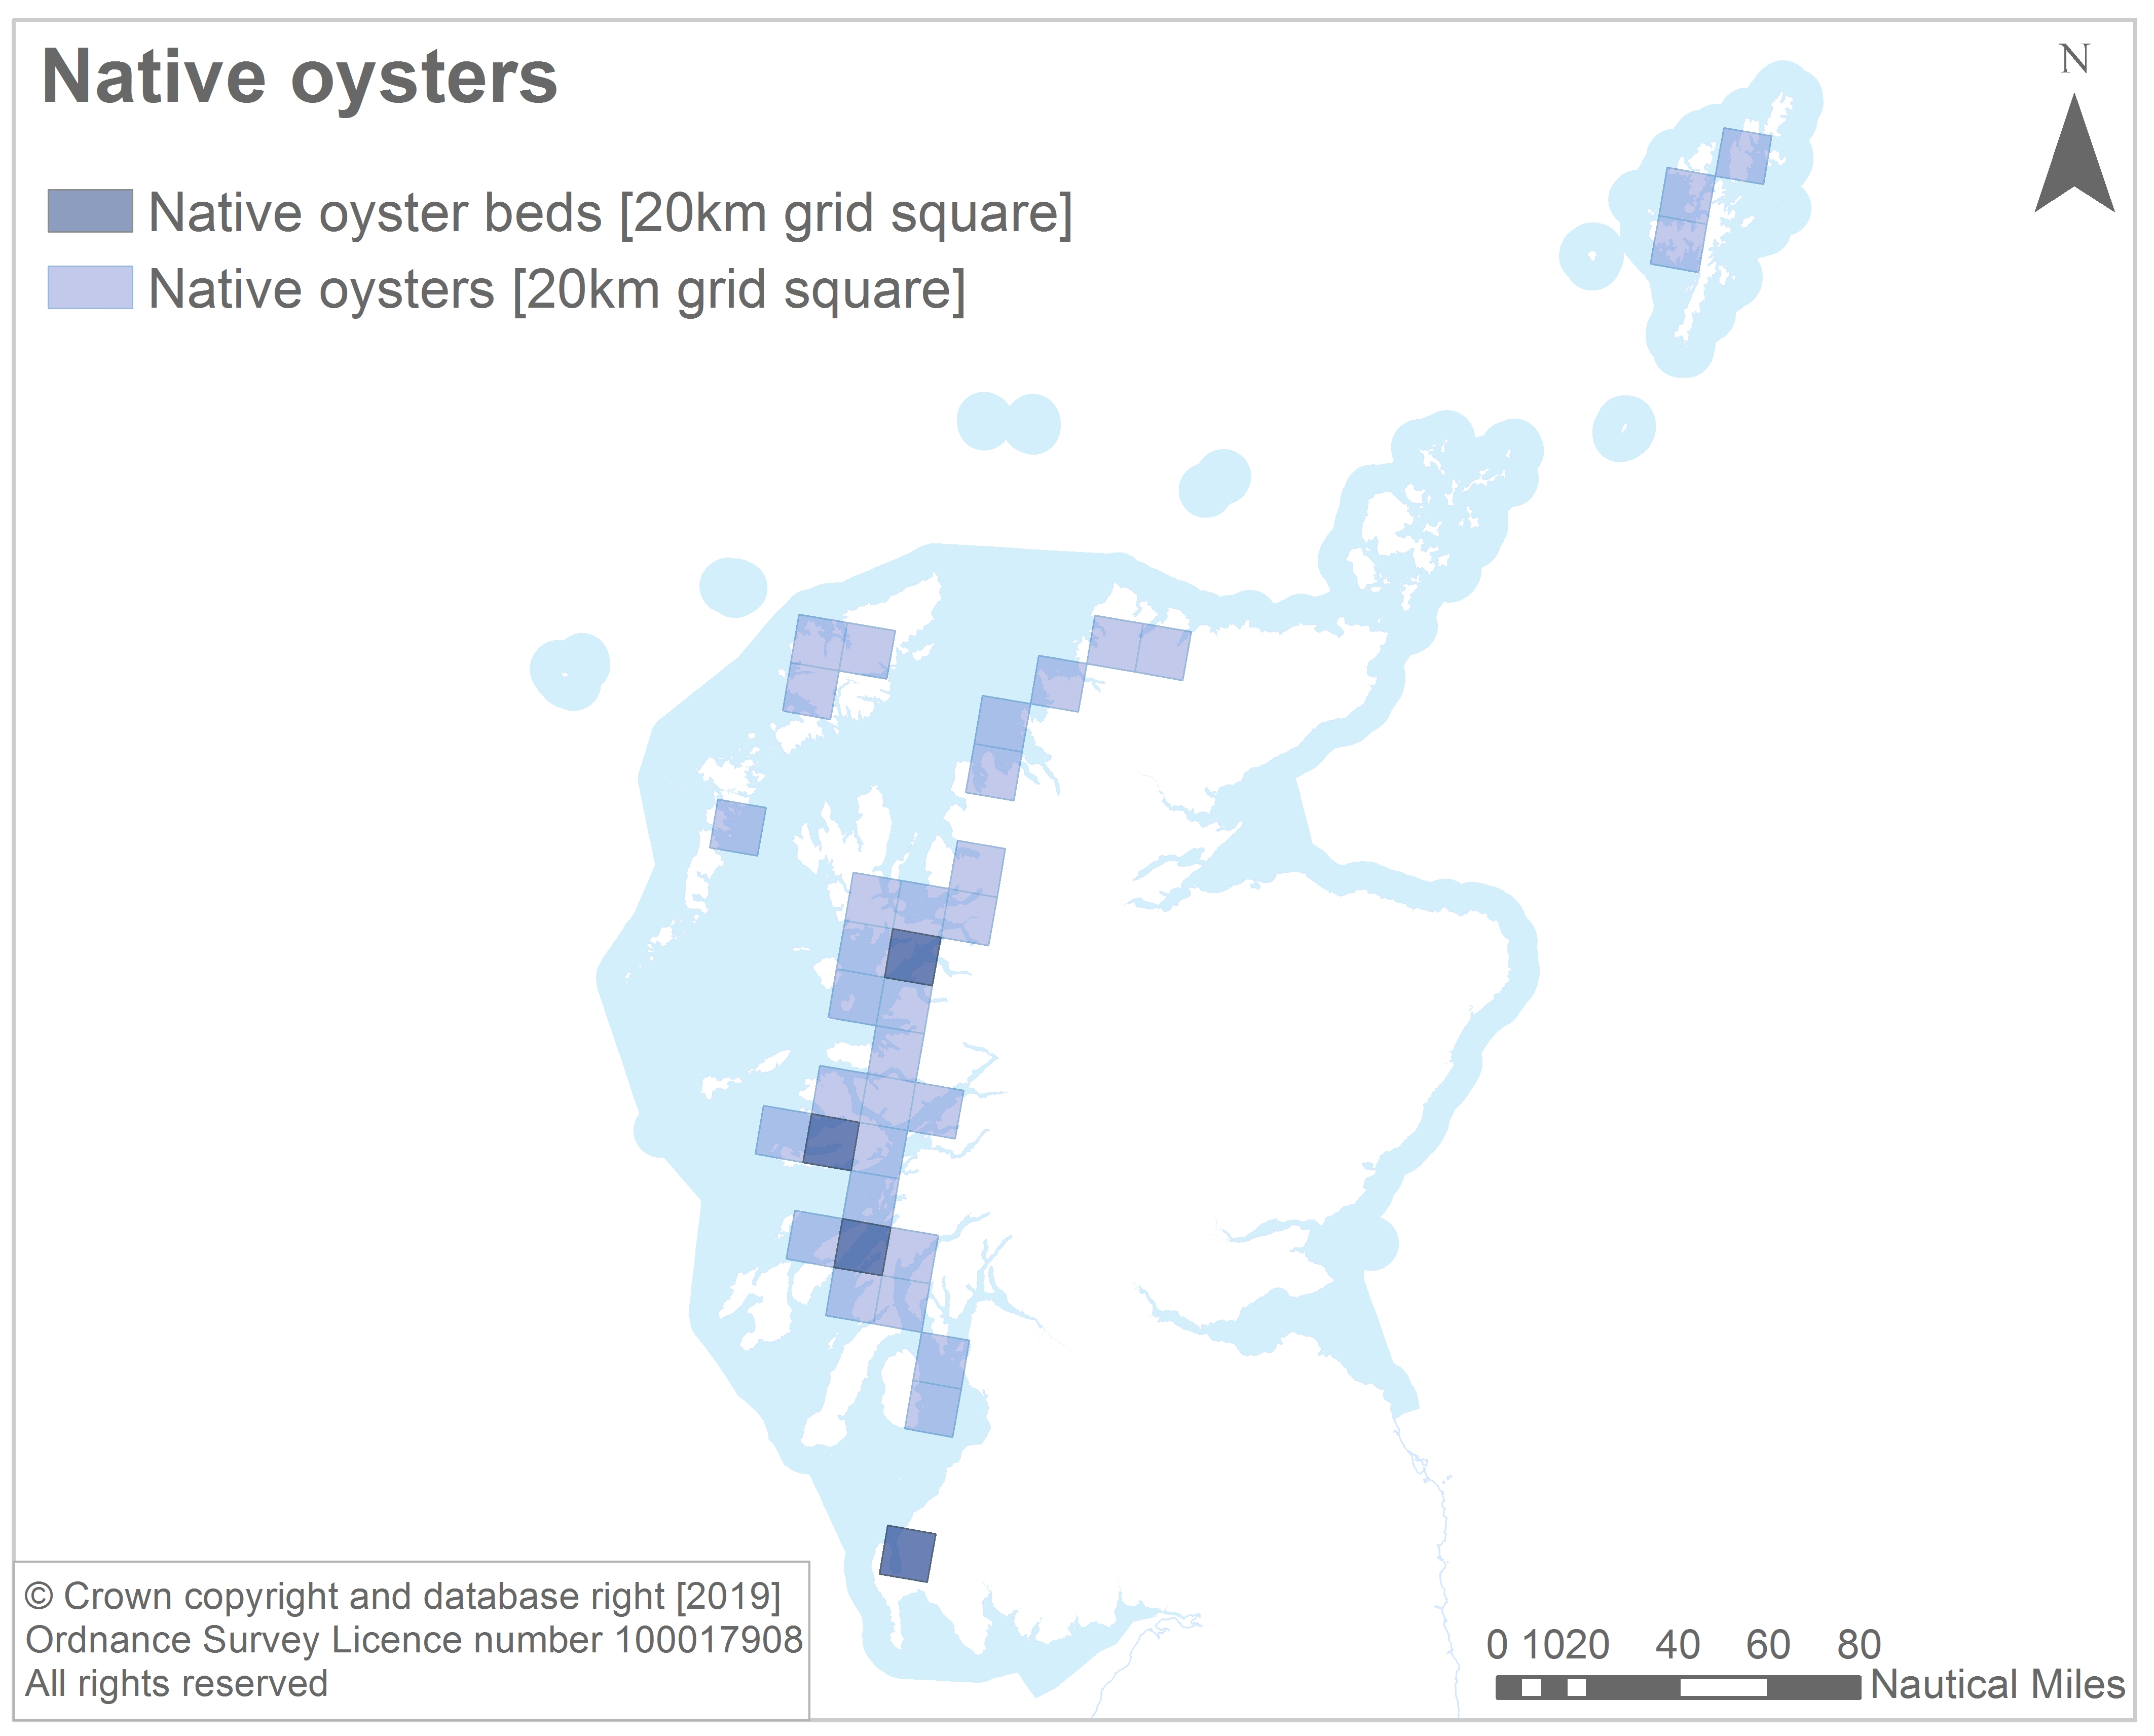 Figure 4: Distribution map of native oysters in Scottish waters today.